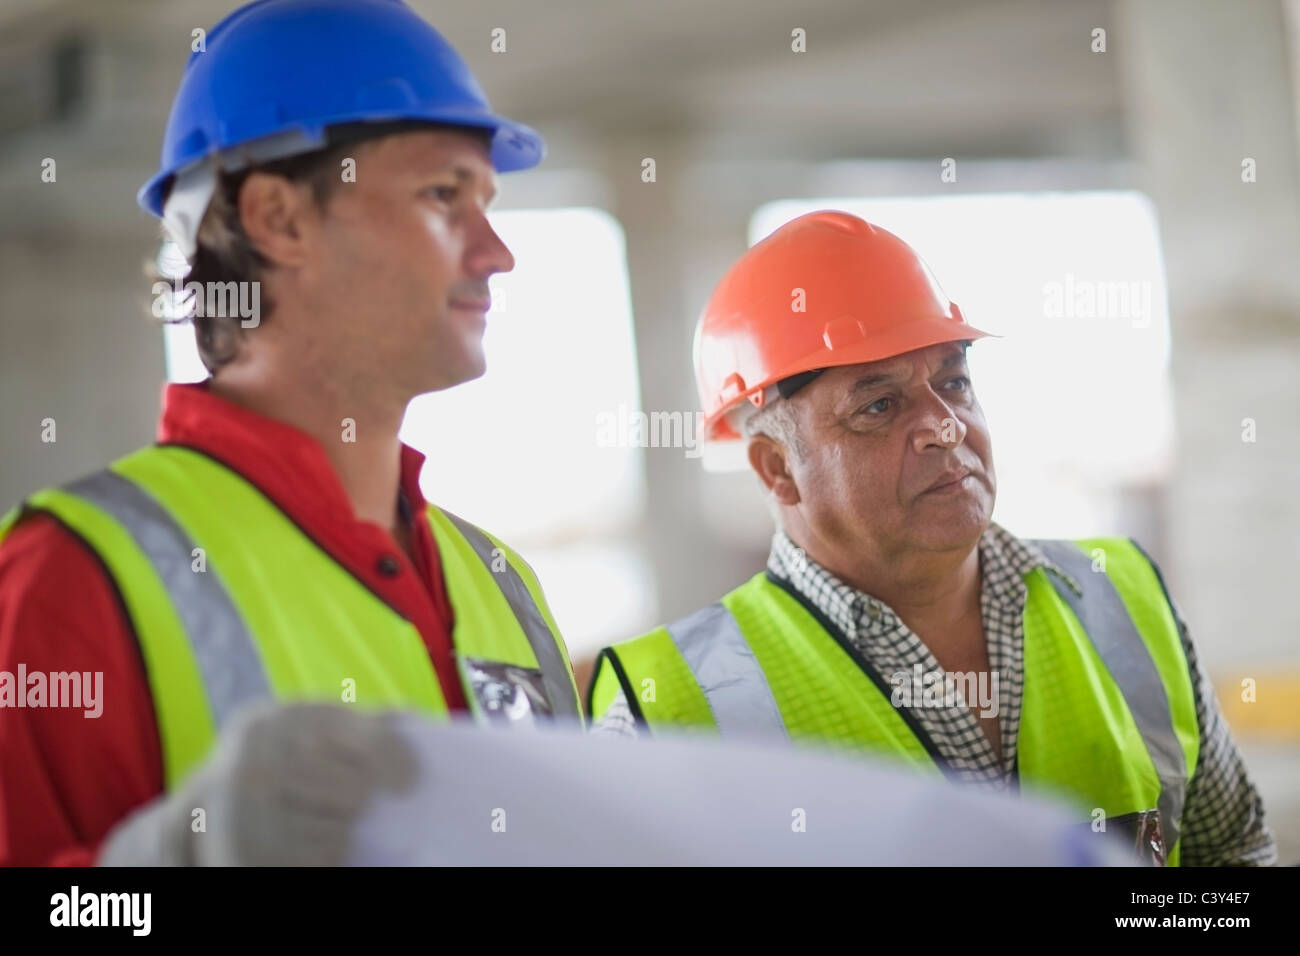 Architect and builder Stock Photo